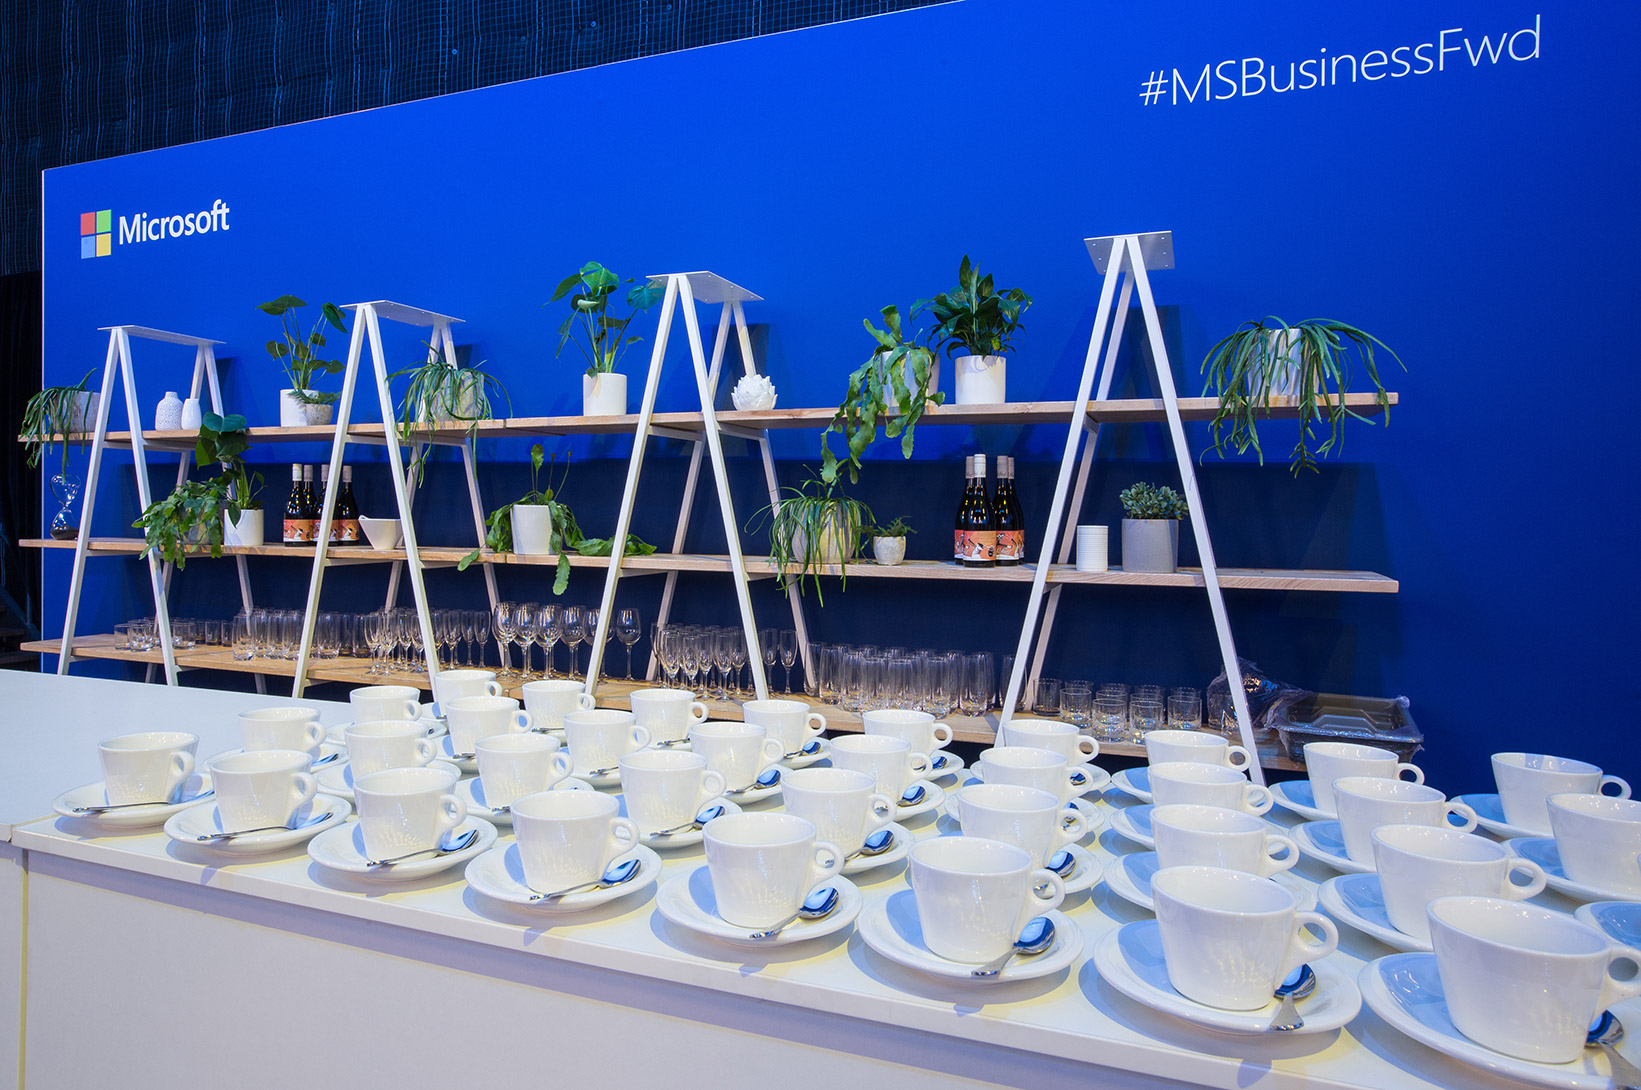 Table full of coffee cups and spoons in front of a blue Microsoft branded backdrop with greenery.